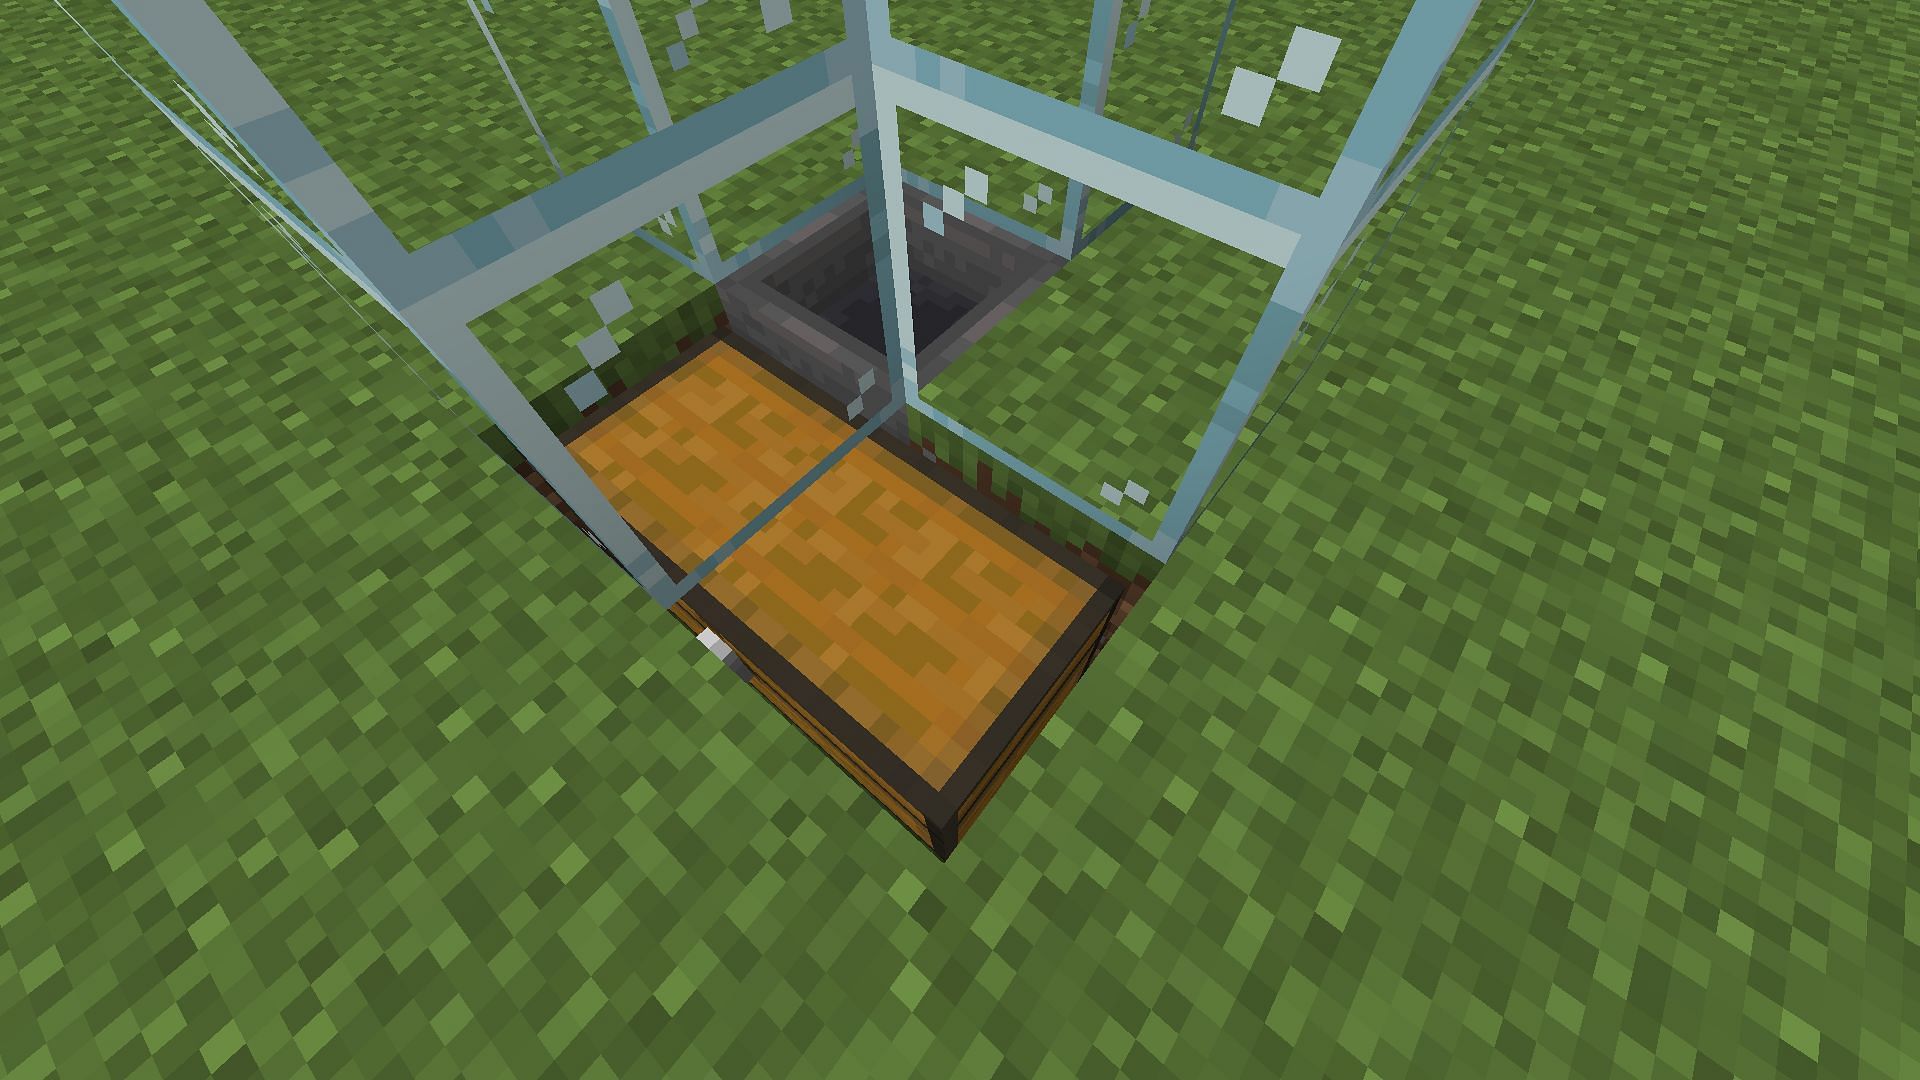 The collection area will store all the pointed dripstone dropped in the farm in Minecraft (Image via Mojang)